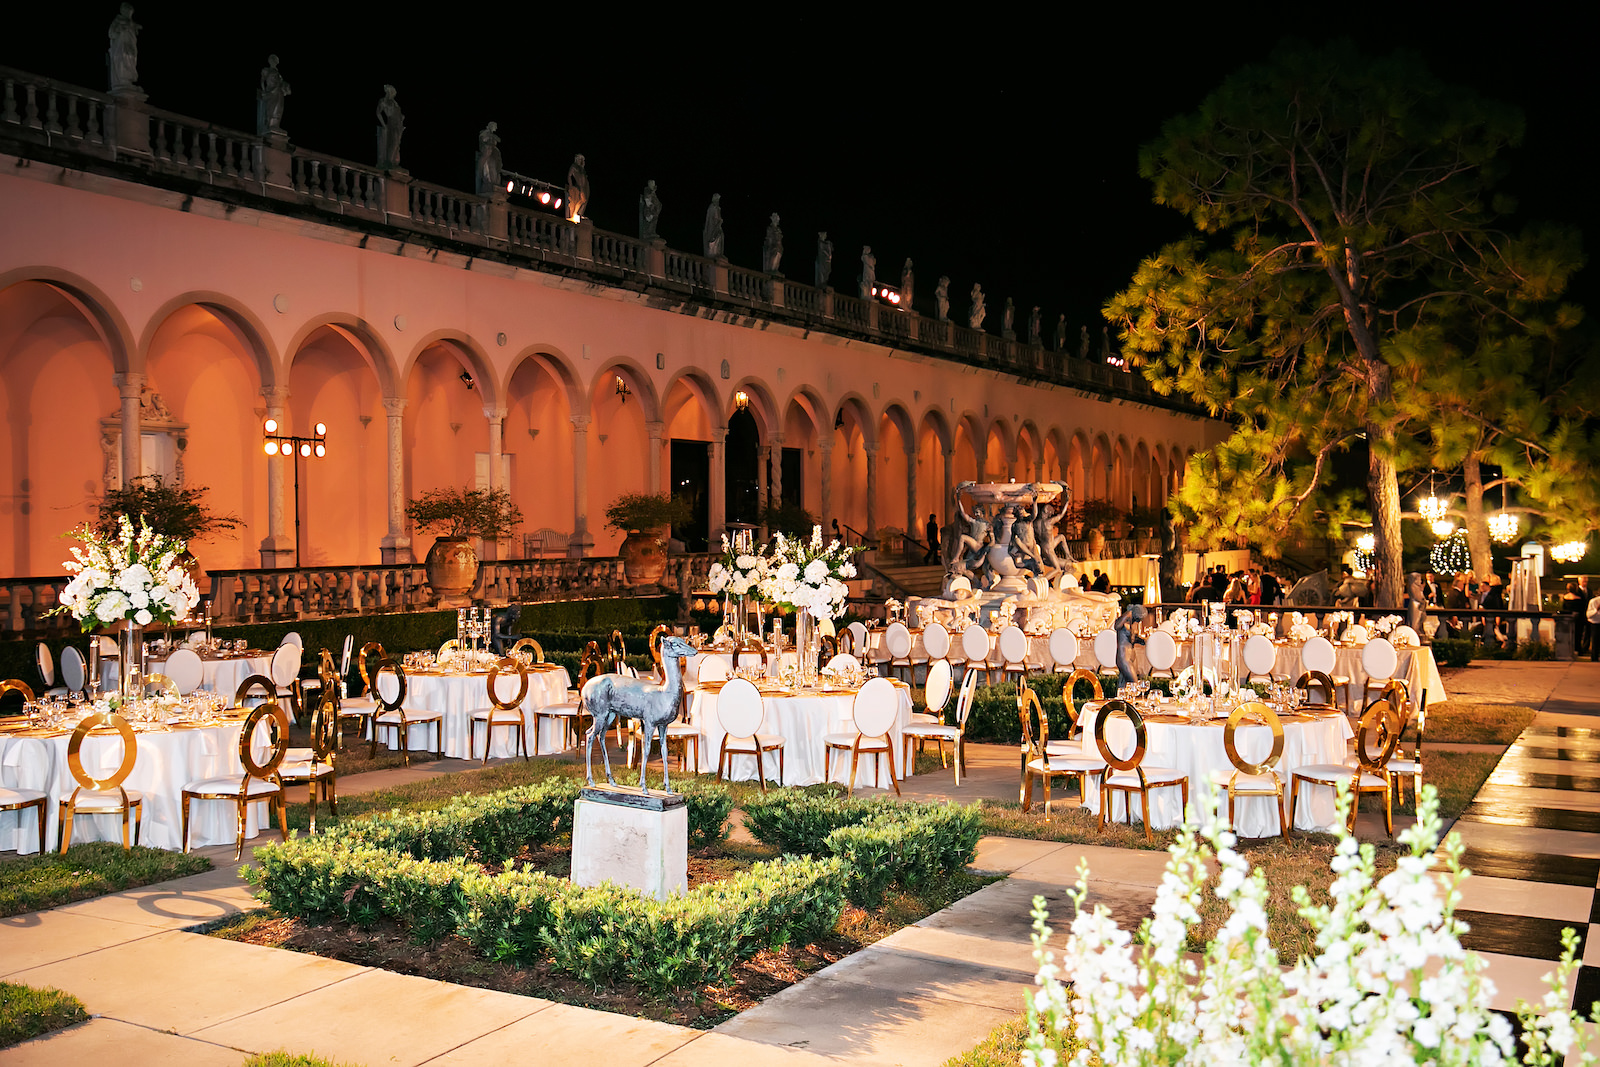 Luxurious Modern Chic Courtyard Wedding Reception Courtyard Wedding Decor, Purple Uplighting, Gold and White Chairs, Black and White Checkered Dance Floor | Tampa Bay Wedding Photographer Limelight Photographer | Sarasota Wedding Venue Ringling Museum